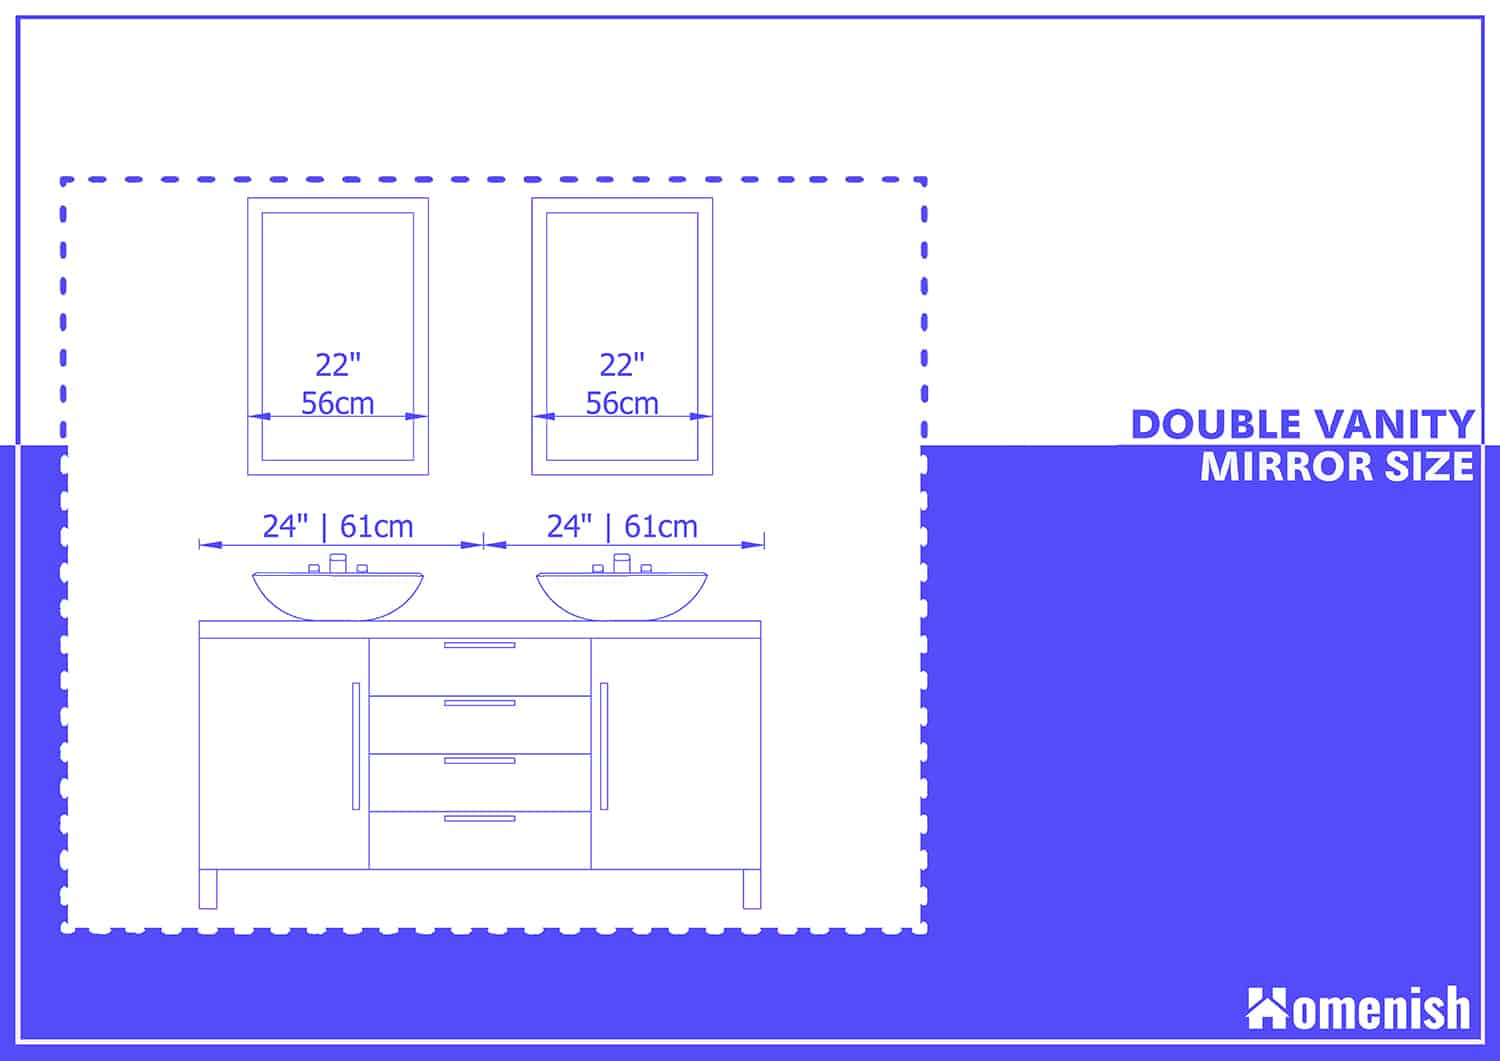 Double Vanity Mirror Size, How Big Should A Double Vanity Be